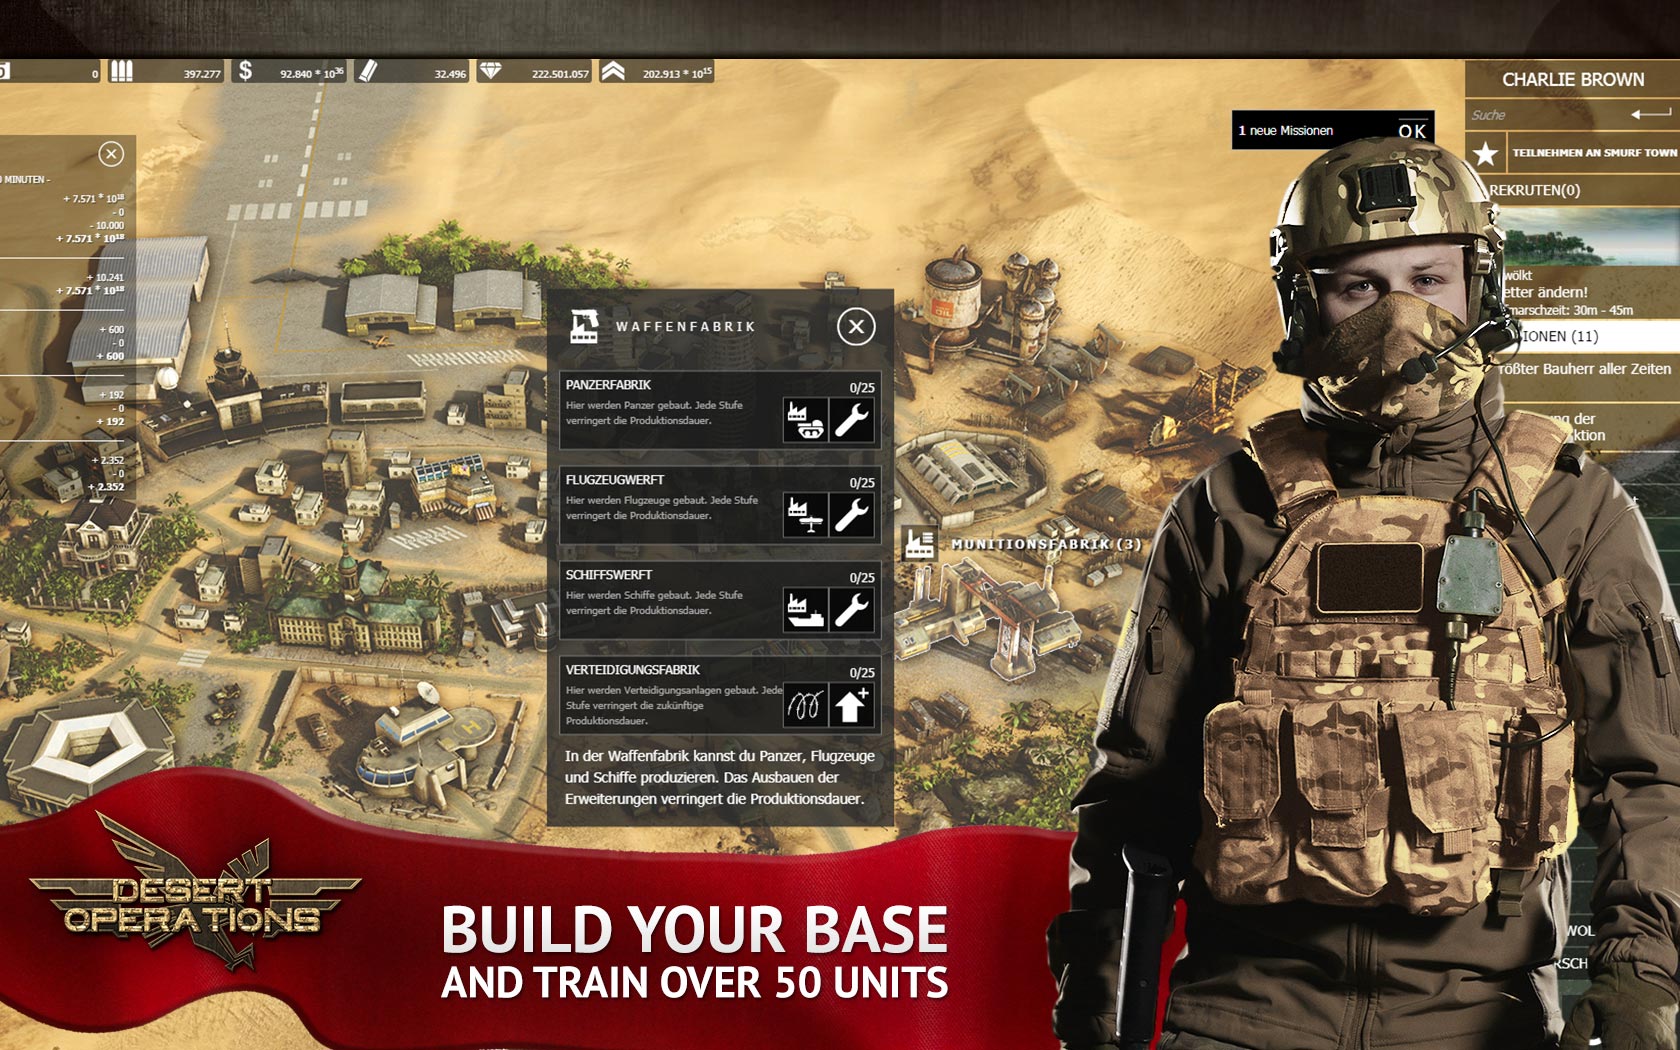 The Free2Play Military Browsergame - Desert Operations